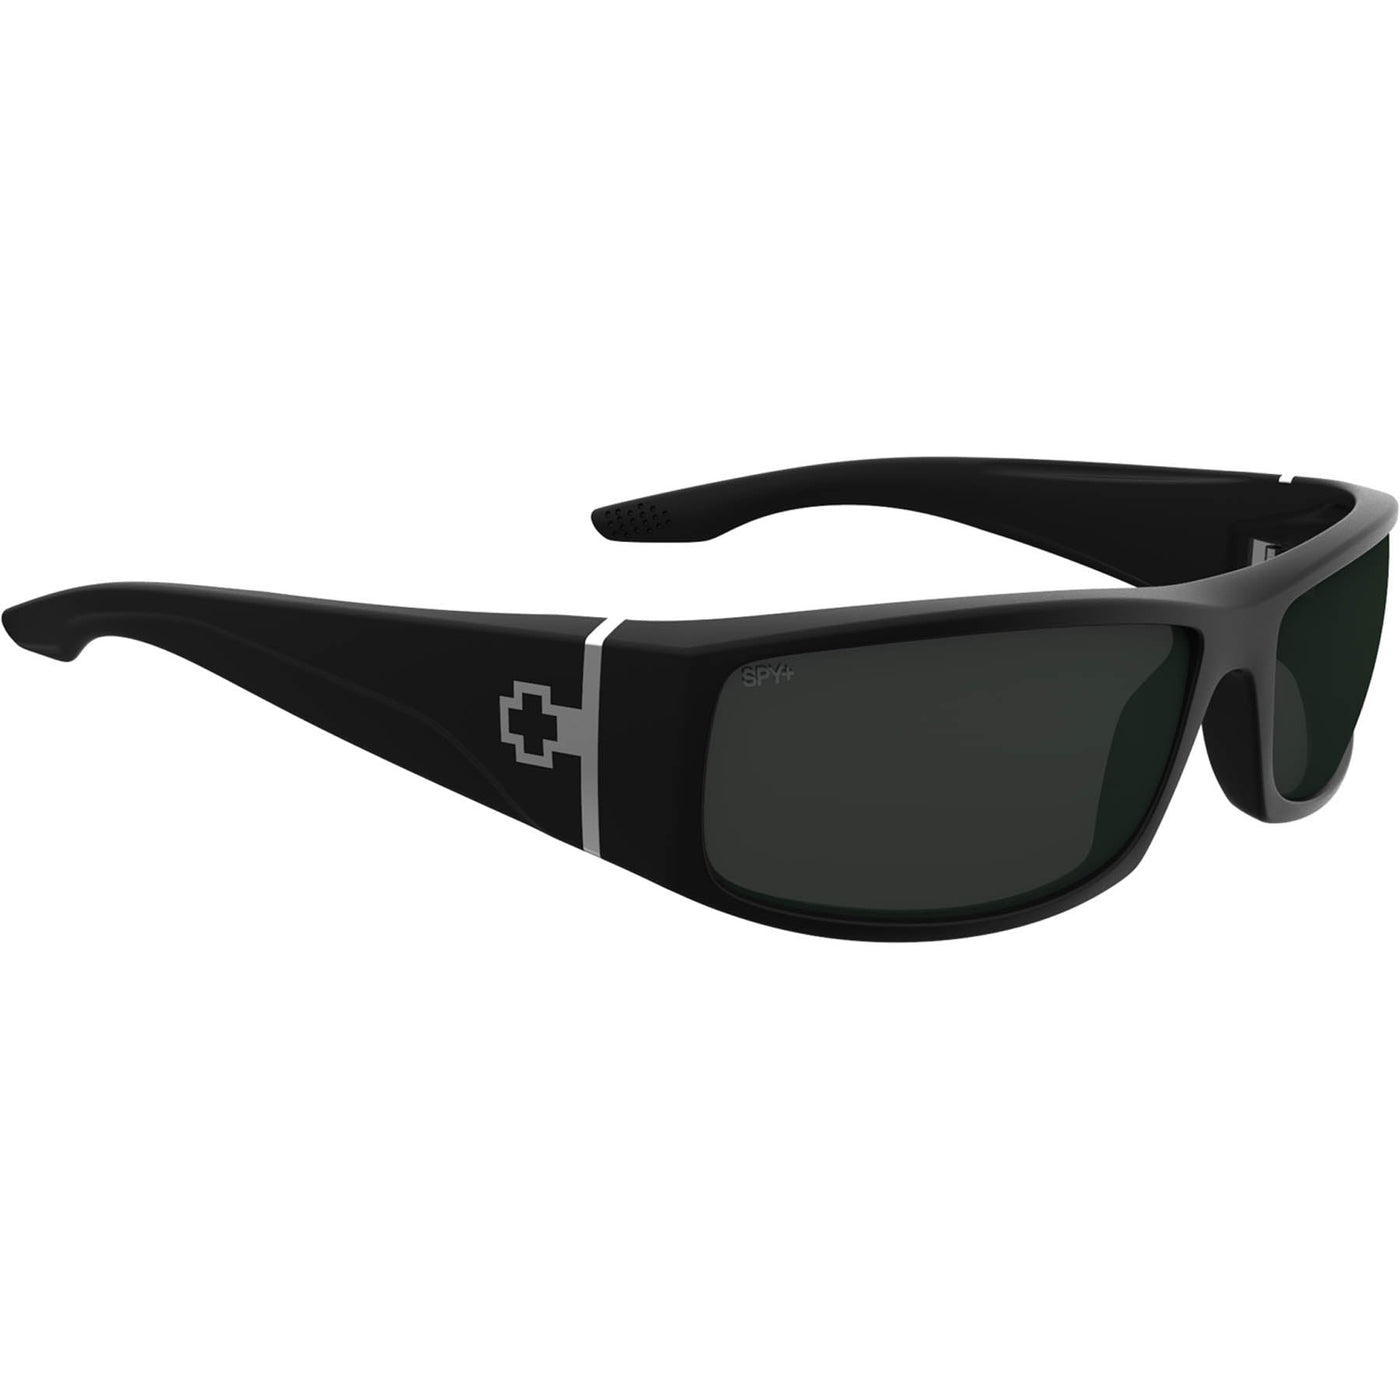 SPY COOPER Sunglasses, Happy Lens - Gray/Green 8Lines Shop - Fast Shipping